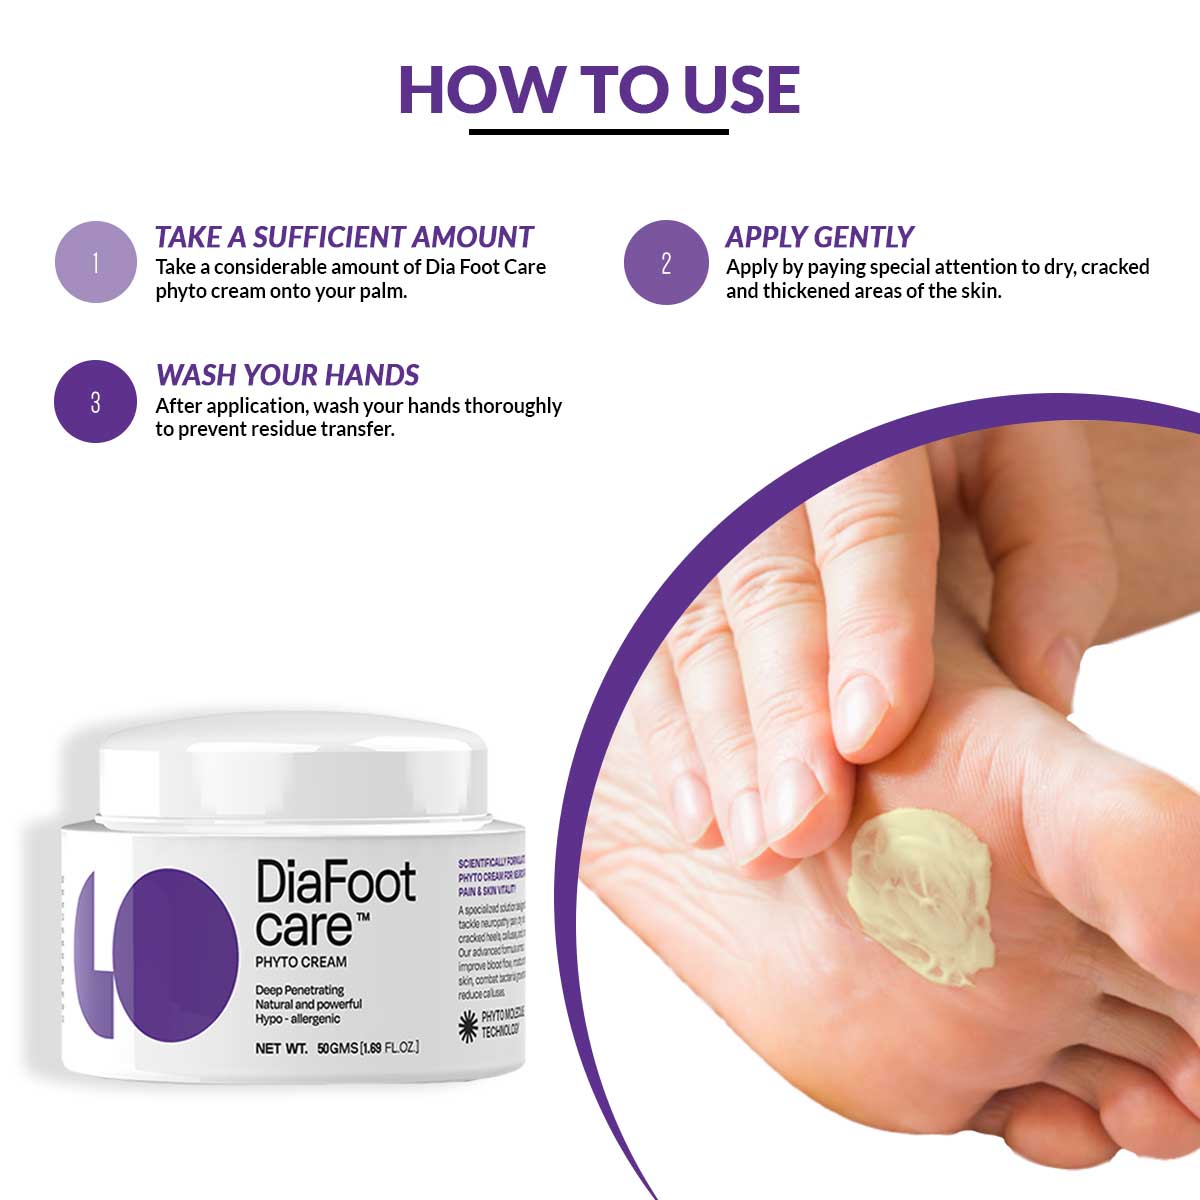 DiaFoot Care Phyto Crème Combo